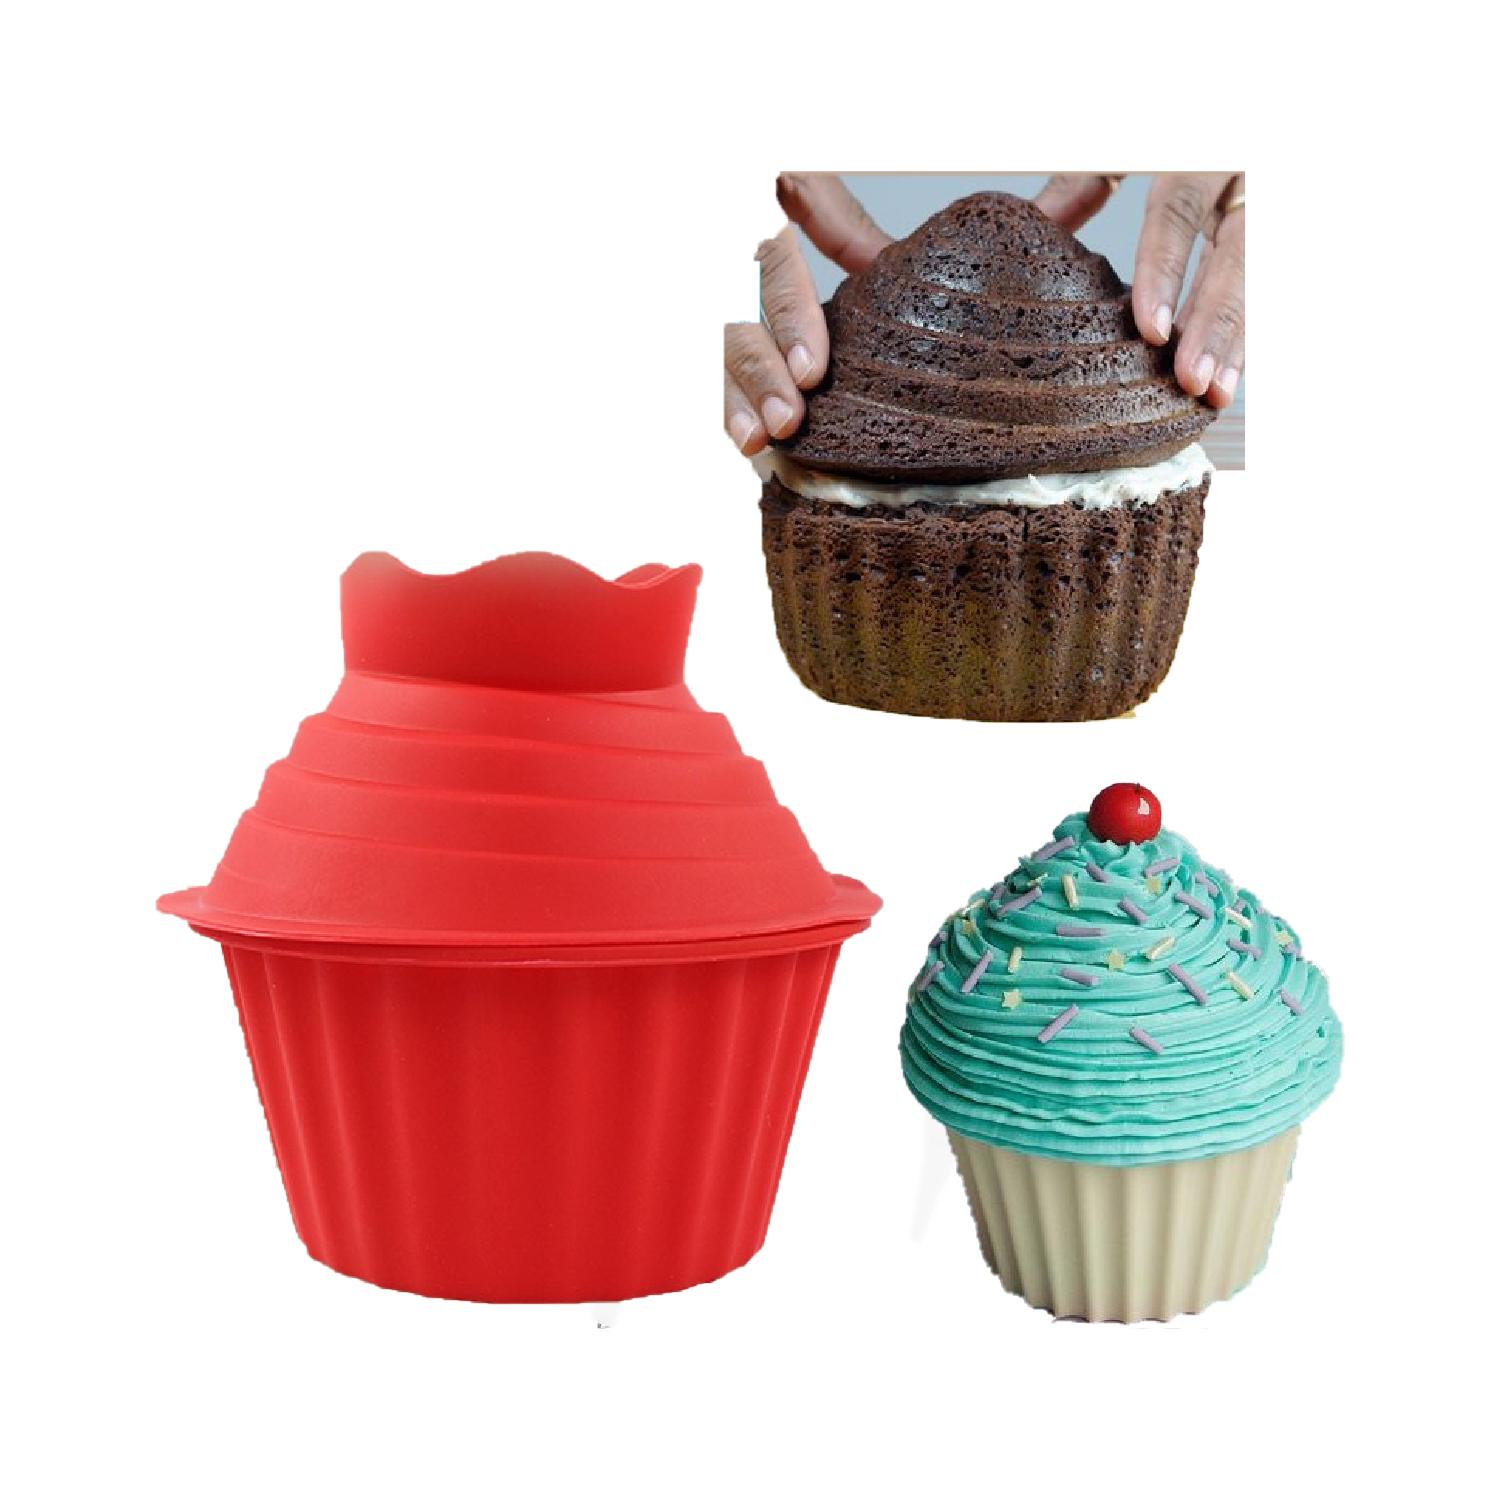 GIANT CUPCAKE SILICON MOULD